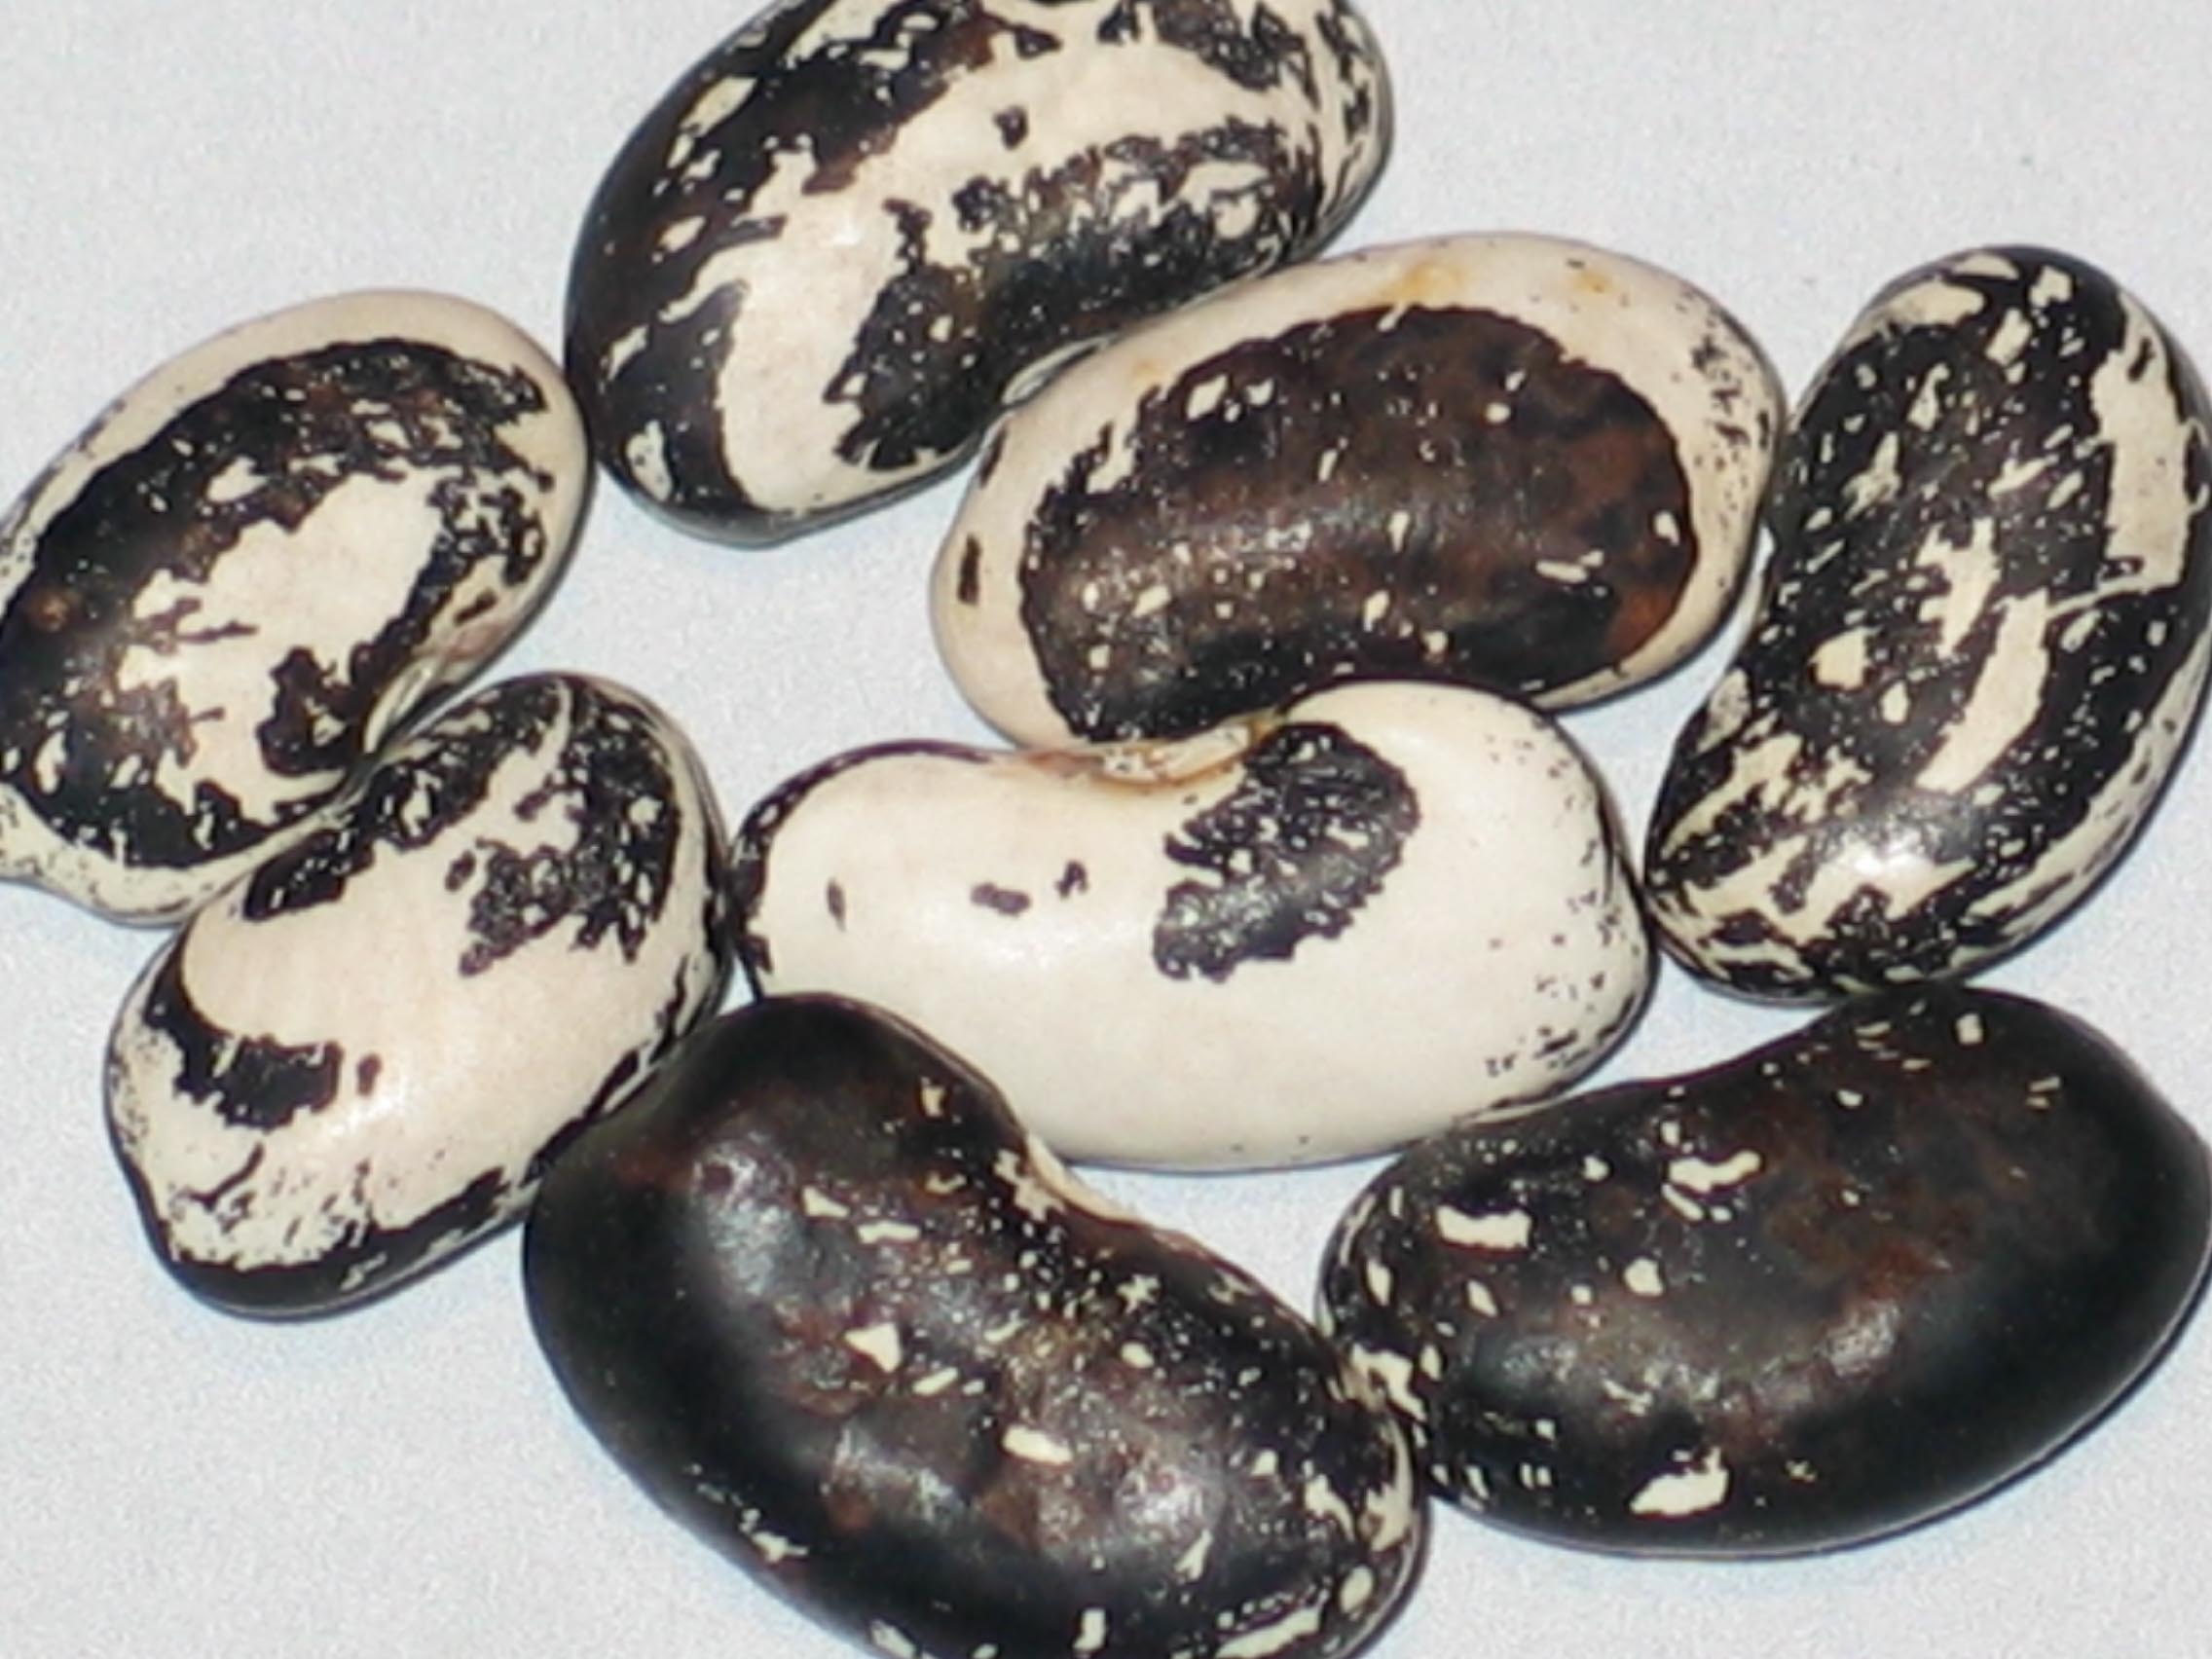 image of Skunk beans